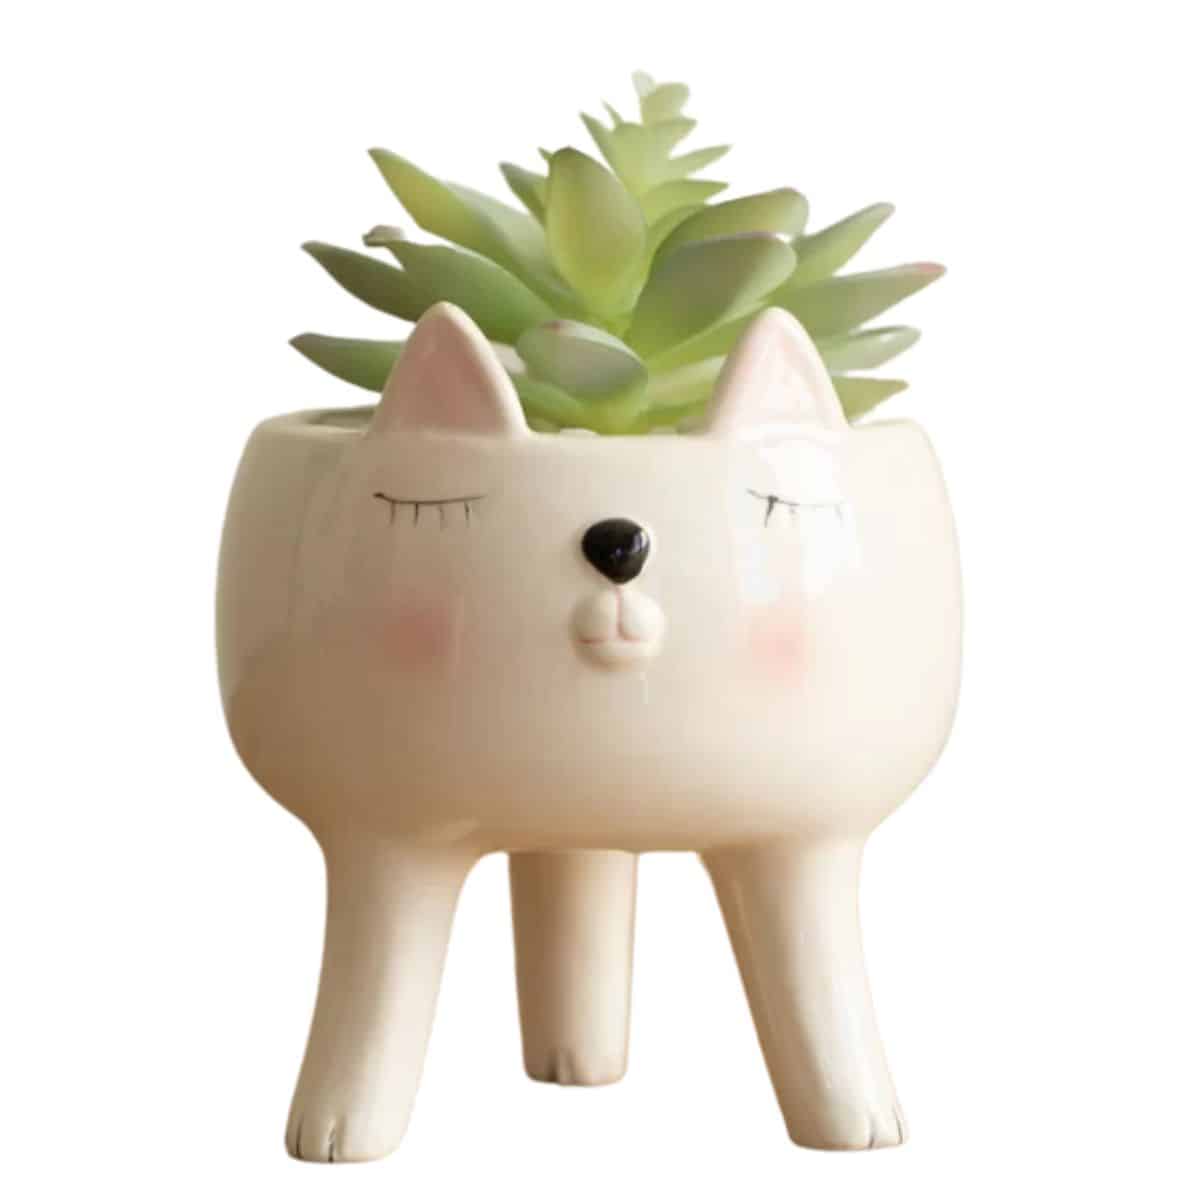 Orrwell Ceramic Cat Statue Planter with succulent planted inside from wayfair